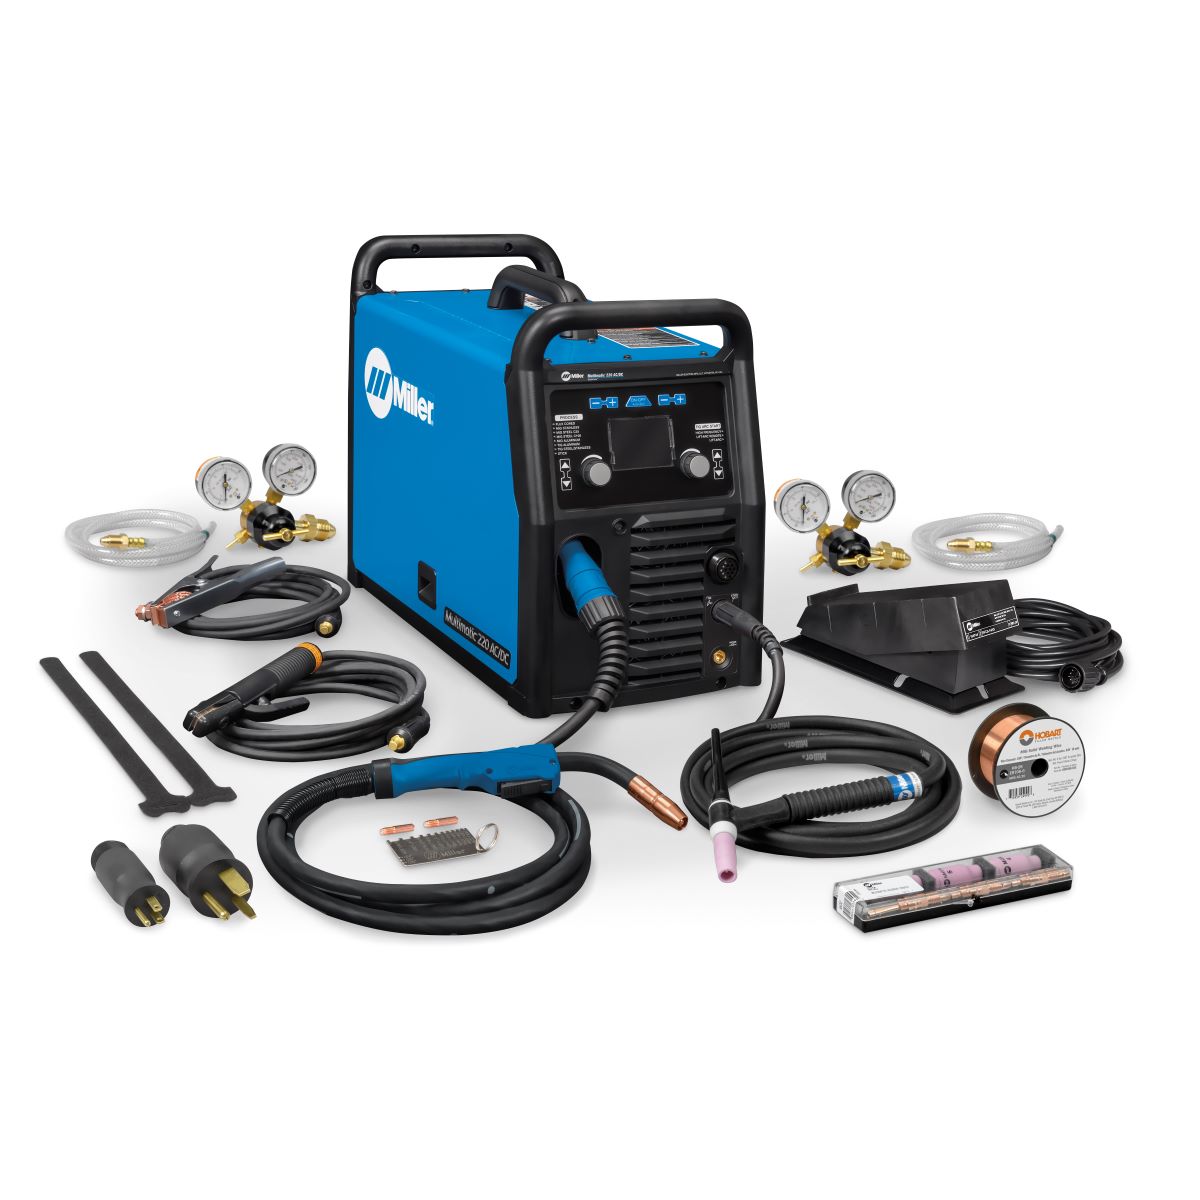 Airgas - MIL951834 - Miller® AlumaFeed® 350 Mpa 1 or 3 Phase MIG Welder  With 208 - 575 Input Voltage, 425 Amp Max Output, XR-AlumaFeed® SuitCase  Push-Pull Wire Feeder And Gun, And Accessory Package